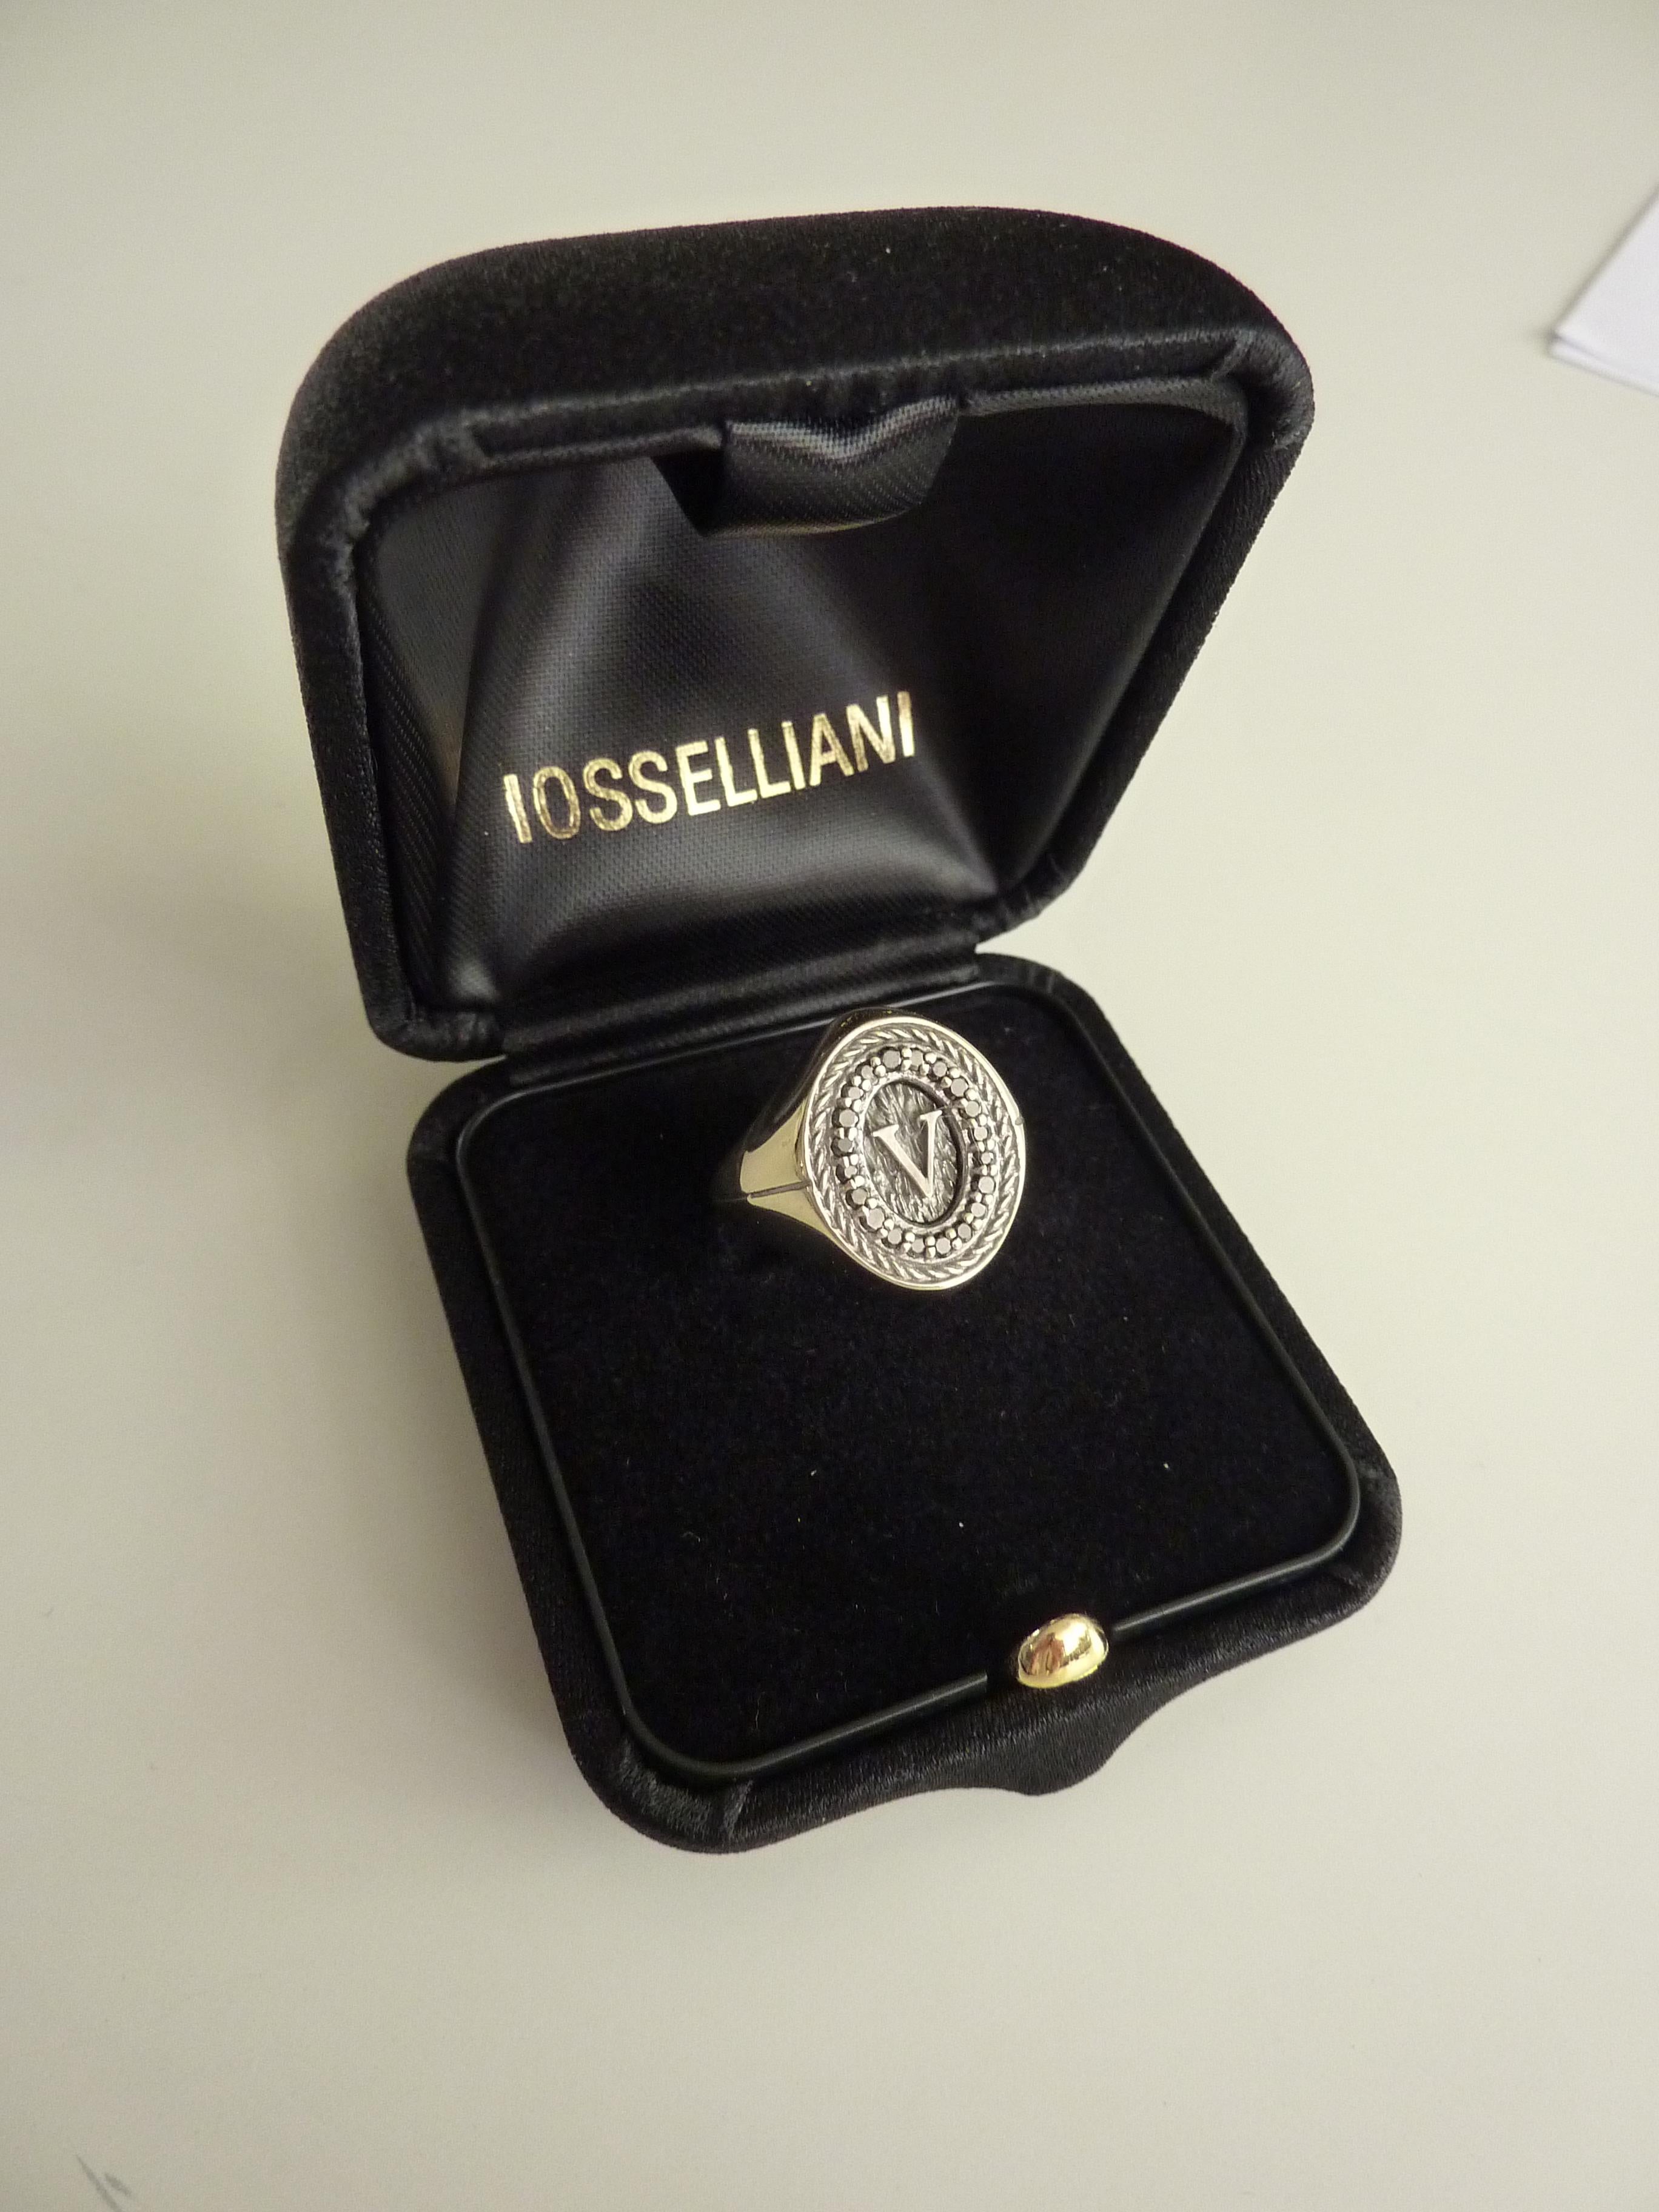 Contemporary 9Carat Gold Initial Signet Ring with Black Diamond Pavé from IOSSELLIANI For Sale